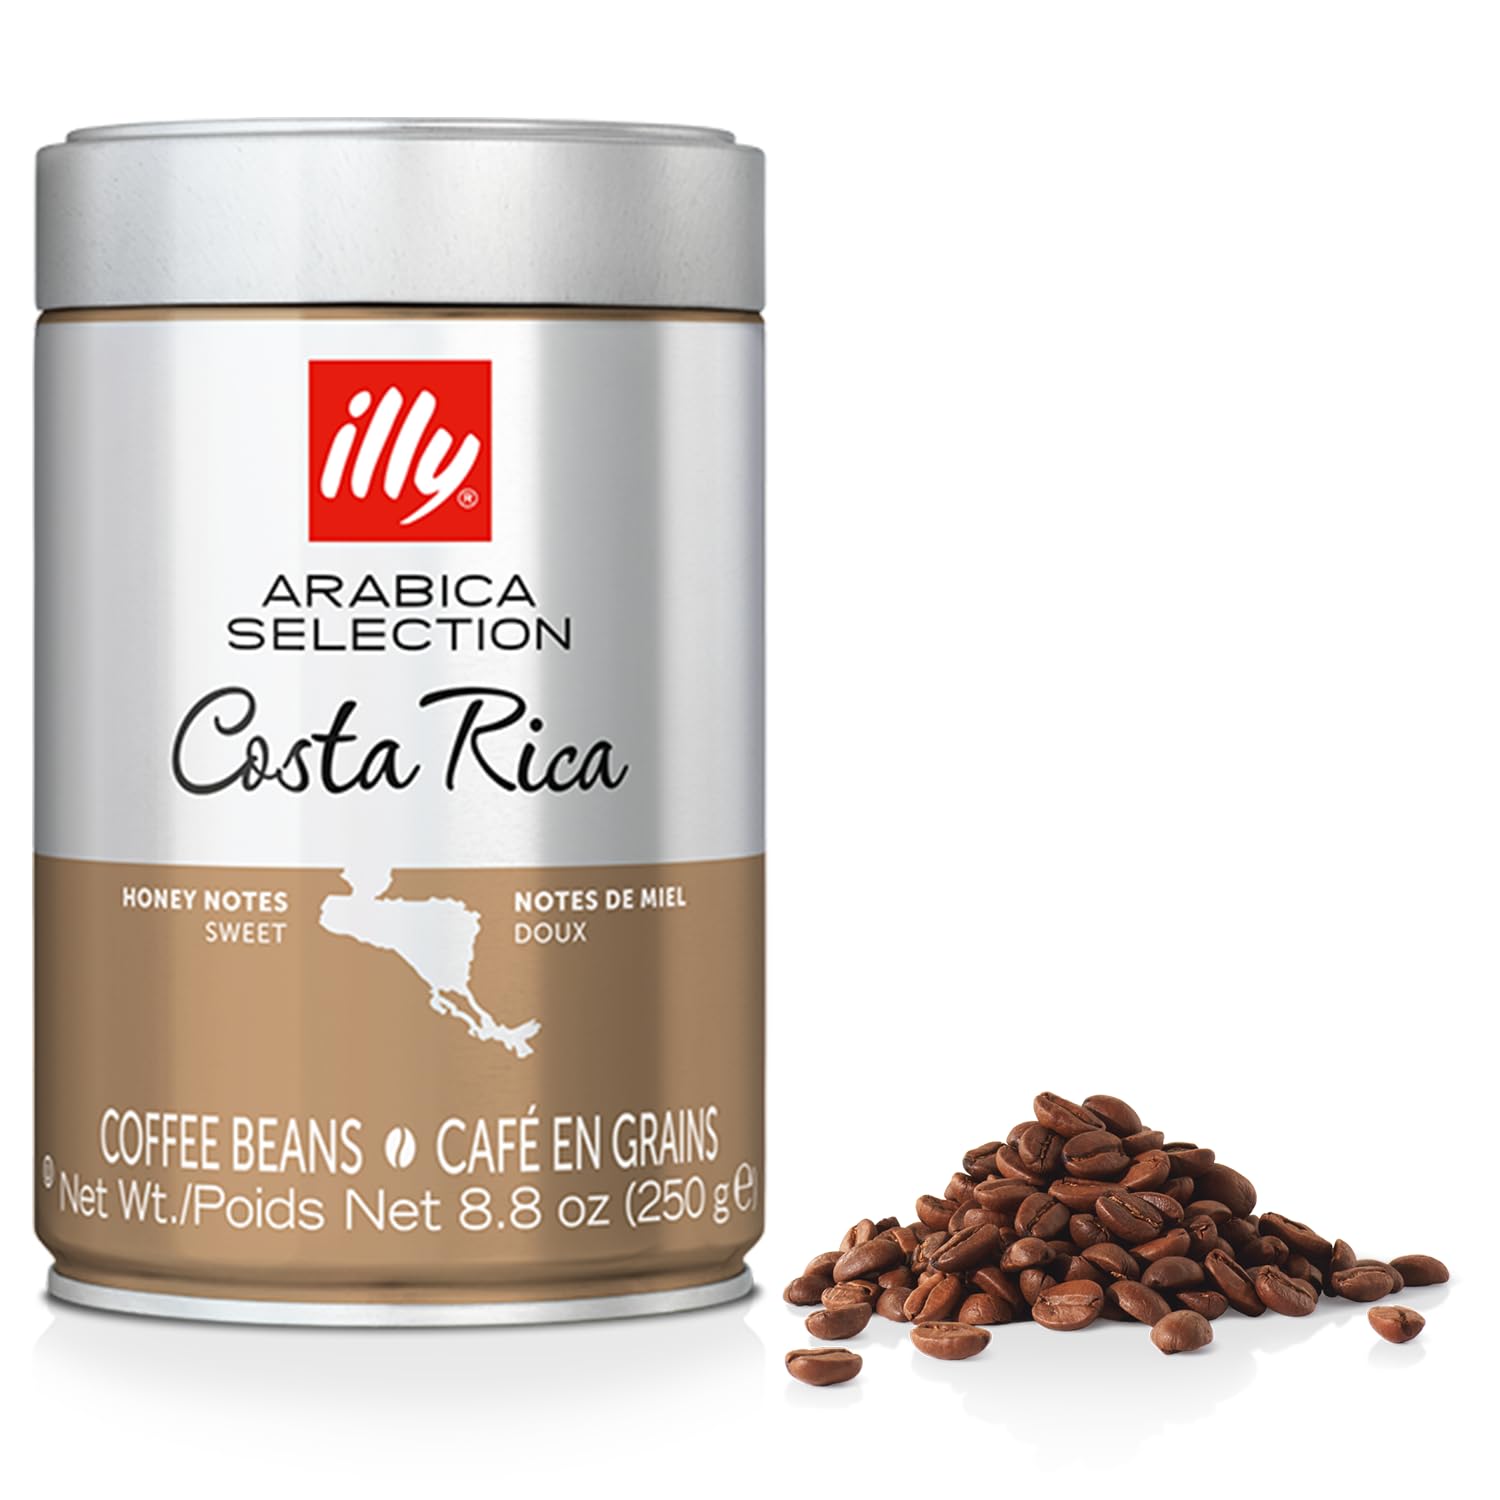 illy Whole Bean Coffee - Perfectly Roasted Whole Coffee Beans – Costa Rica Medium Roast - with Notes of Honey, Vanilla & Citrus - 100% Arabica Coffee - No Preservatives – 8.8 Ounce